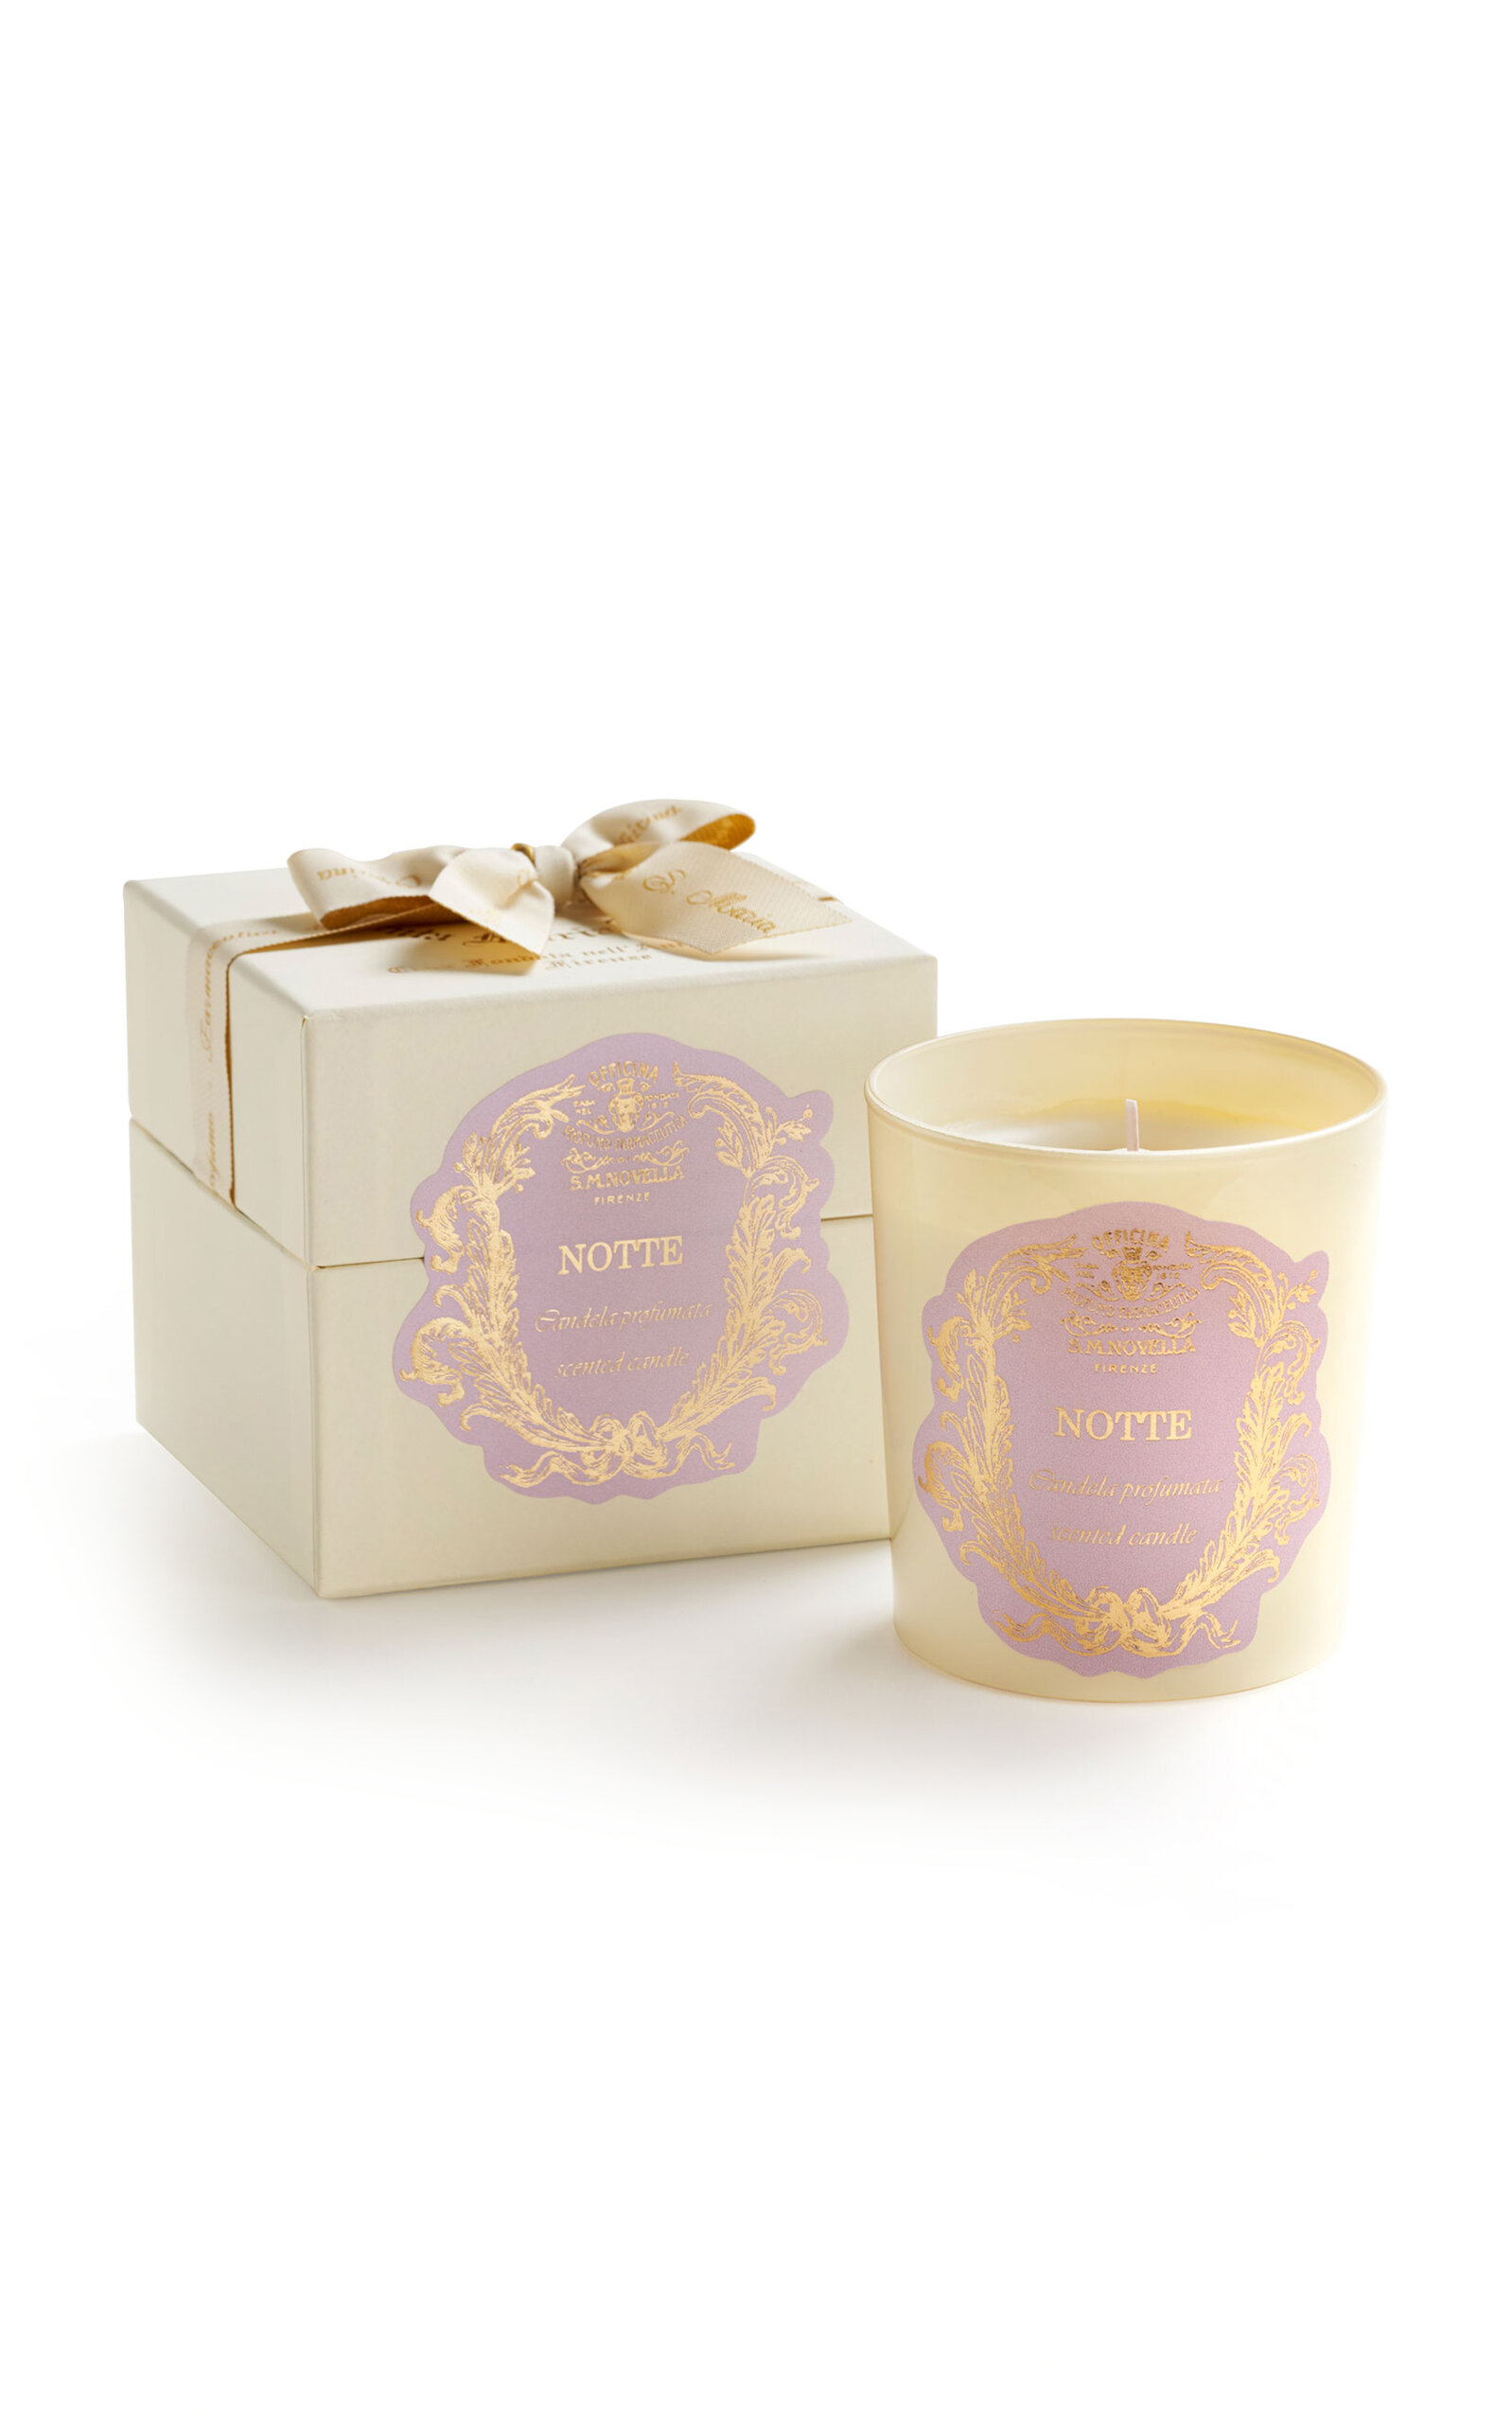 Santa Maria Novella Notte Scented Candle In Pink